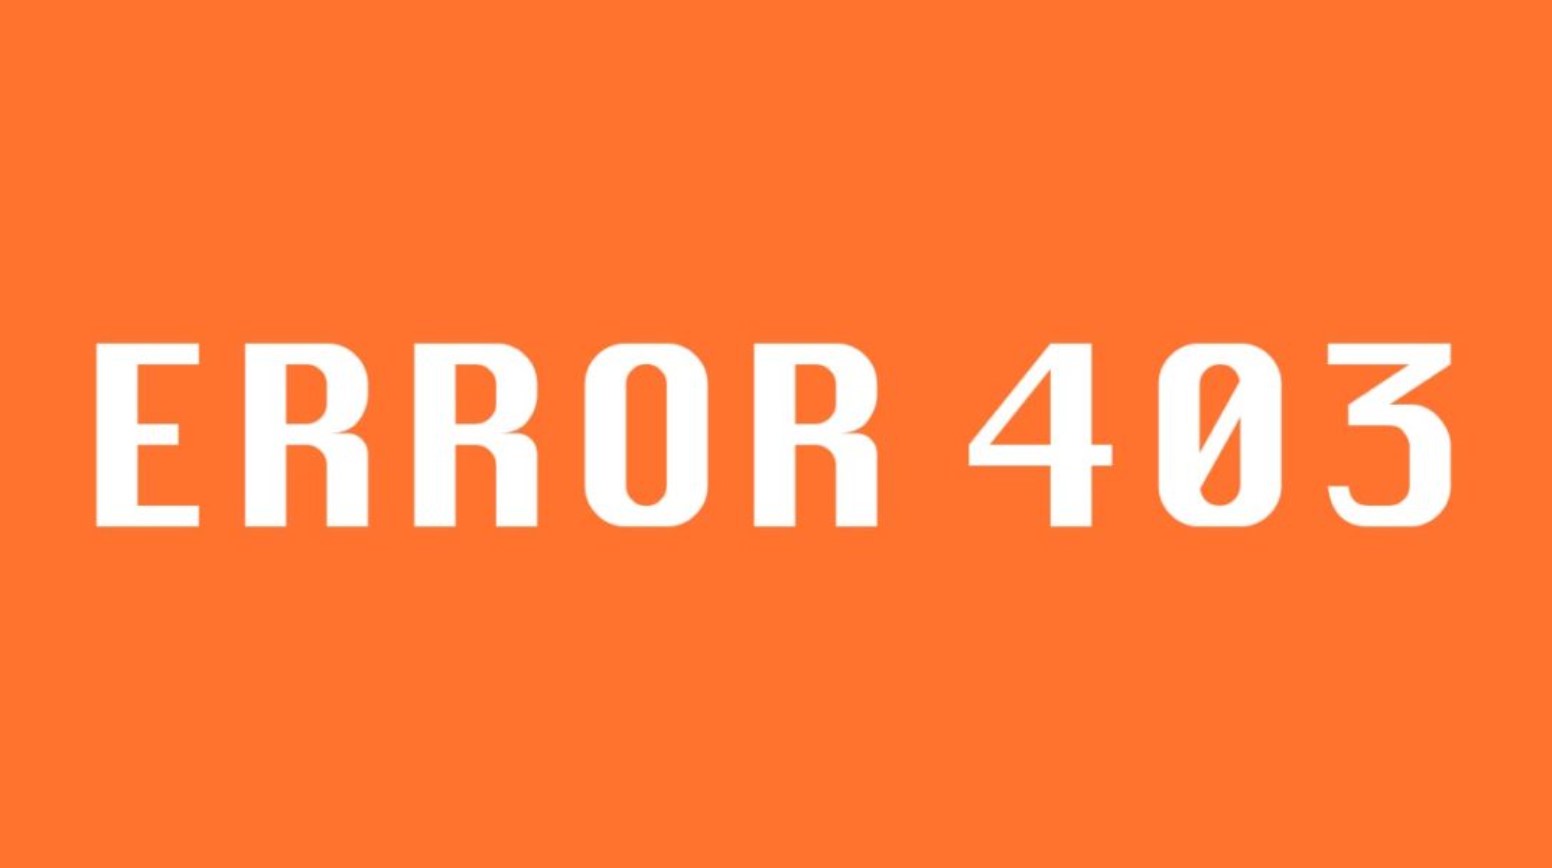 HTTP 403 Forbidden Error: What It Is And How To Fix It